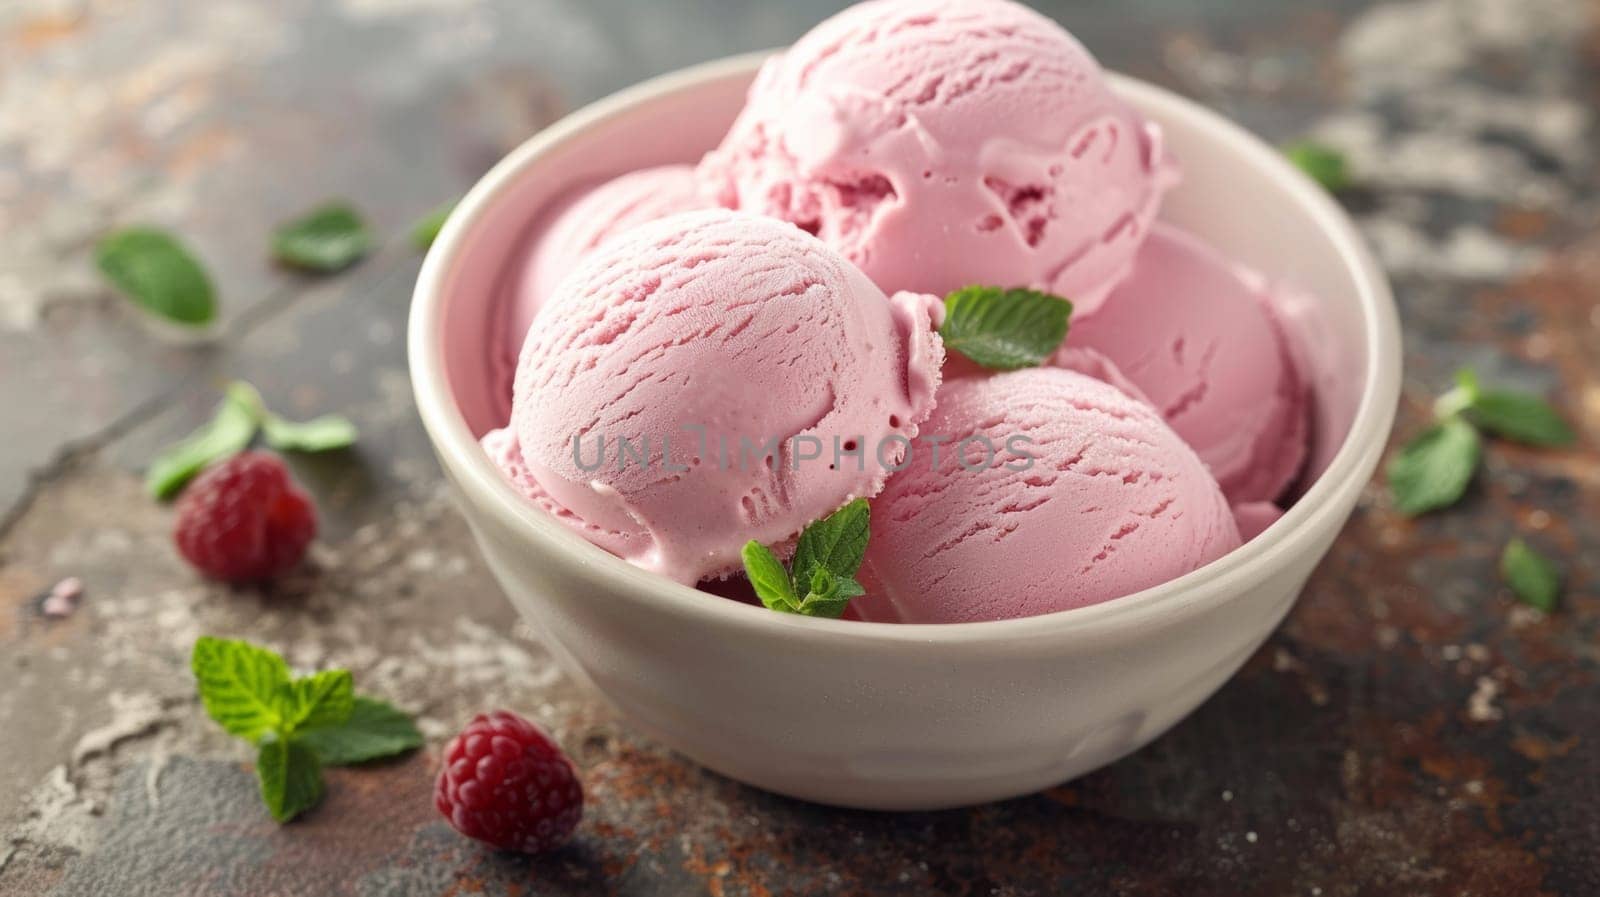 A bowl of ice cream with raspberries and mint leaves